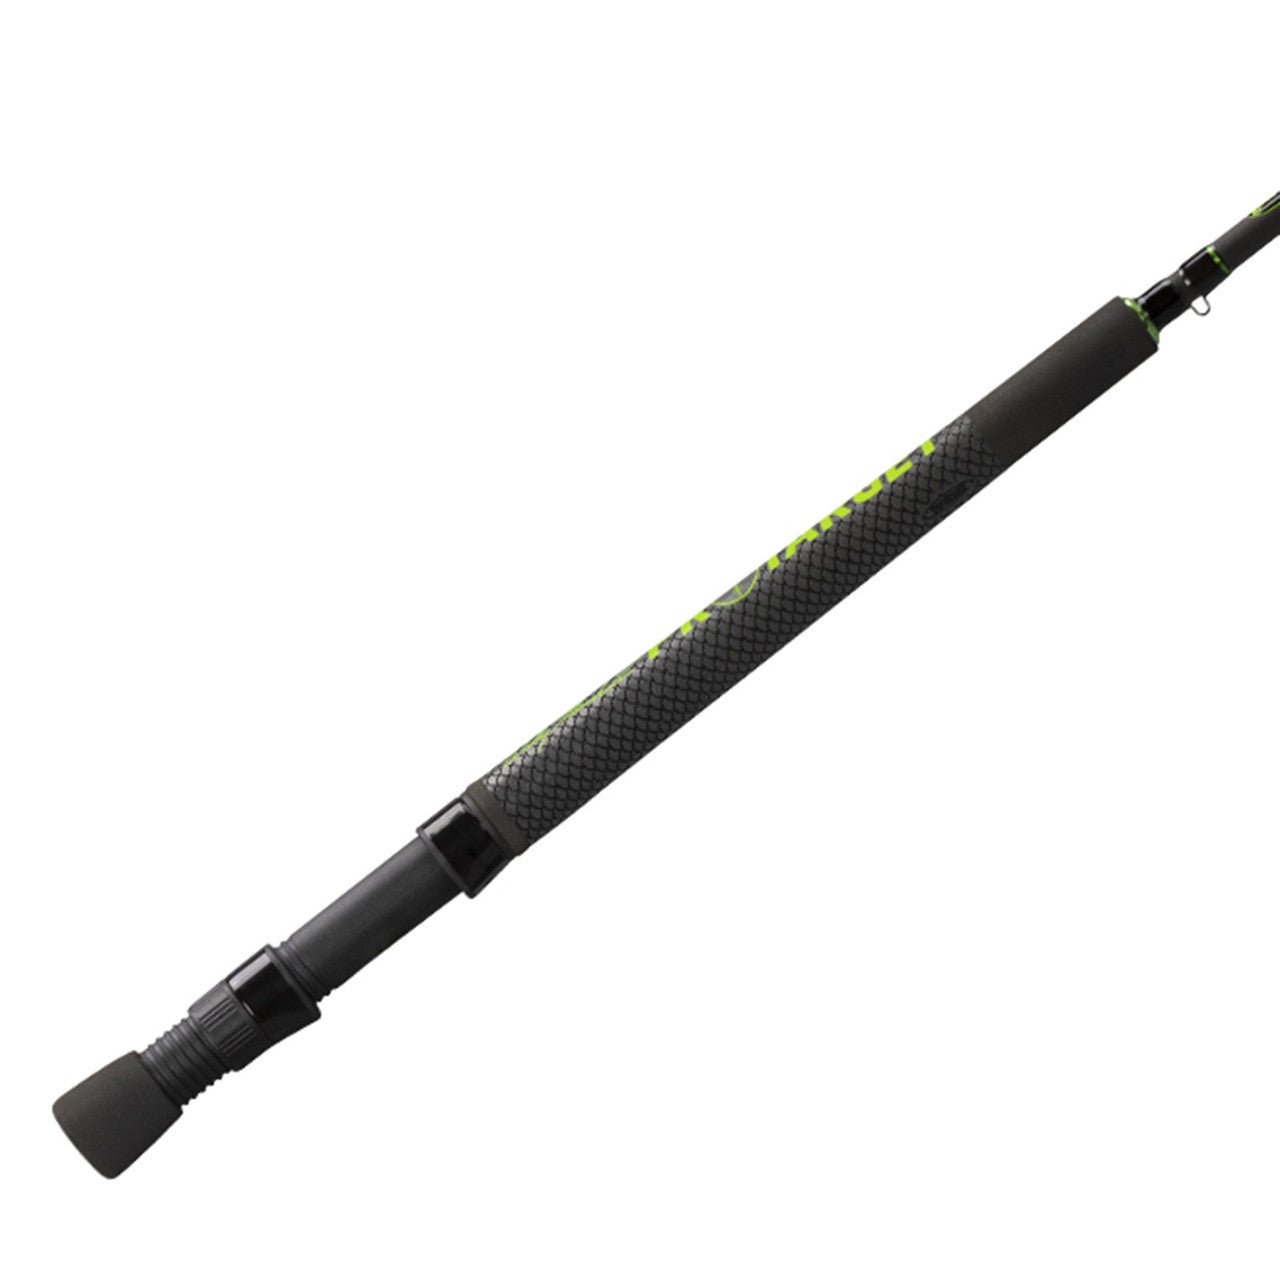 Lew's Wally Marshall Pro Target Series Spinning Rod